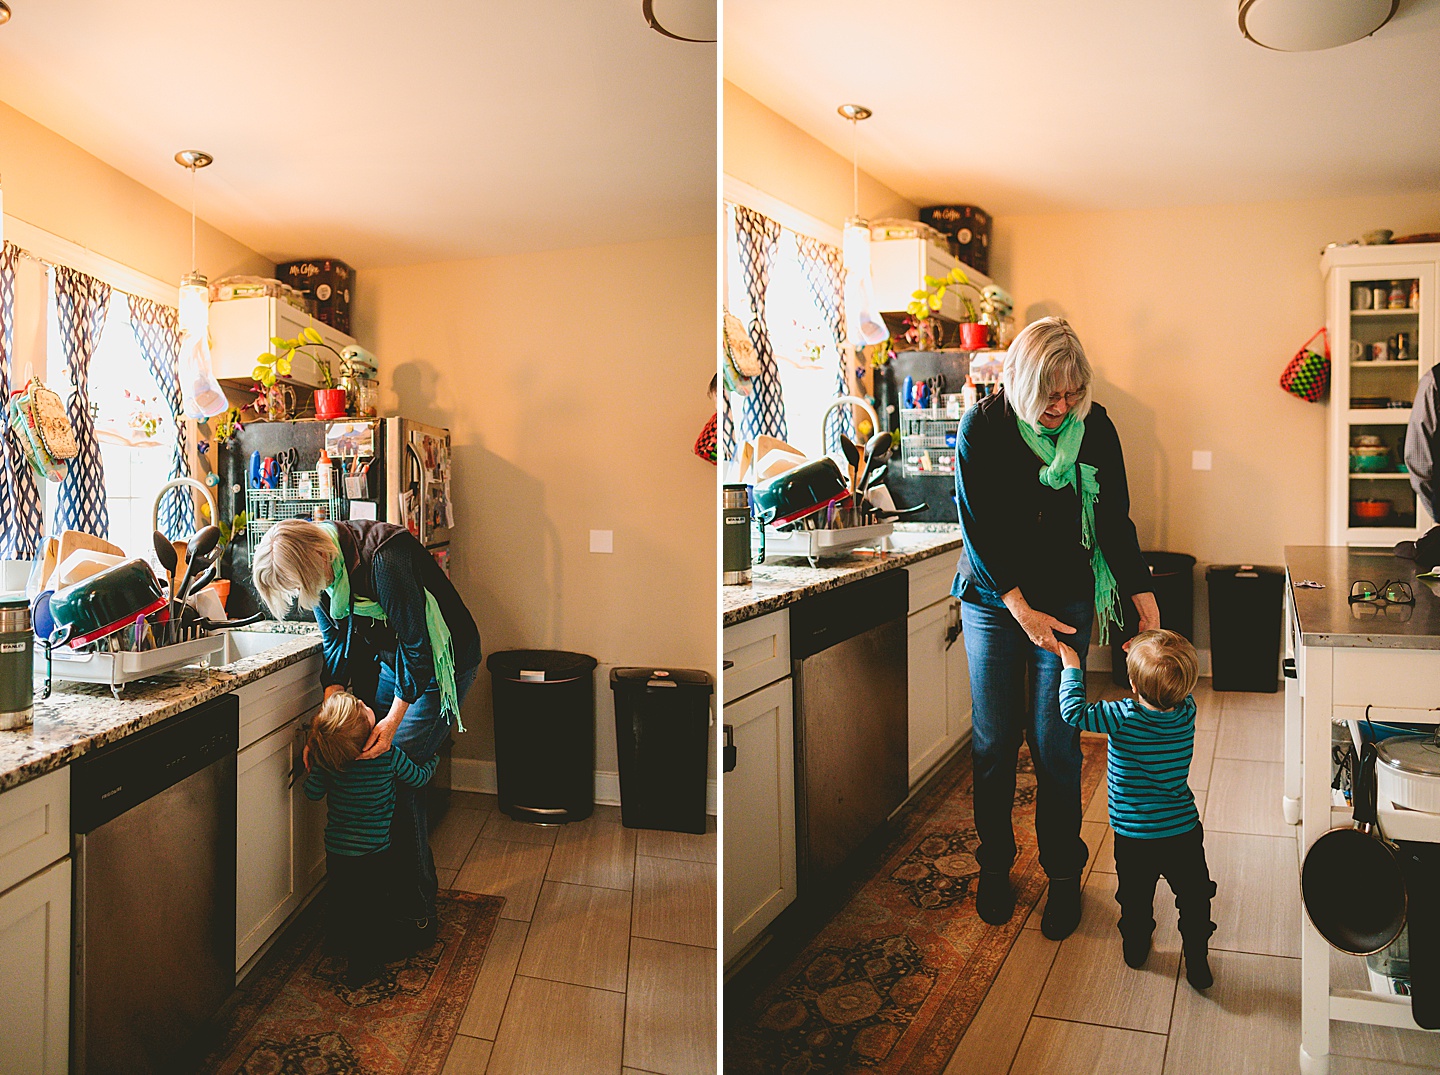 Grandma dancing with toddler in the kitchen